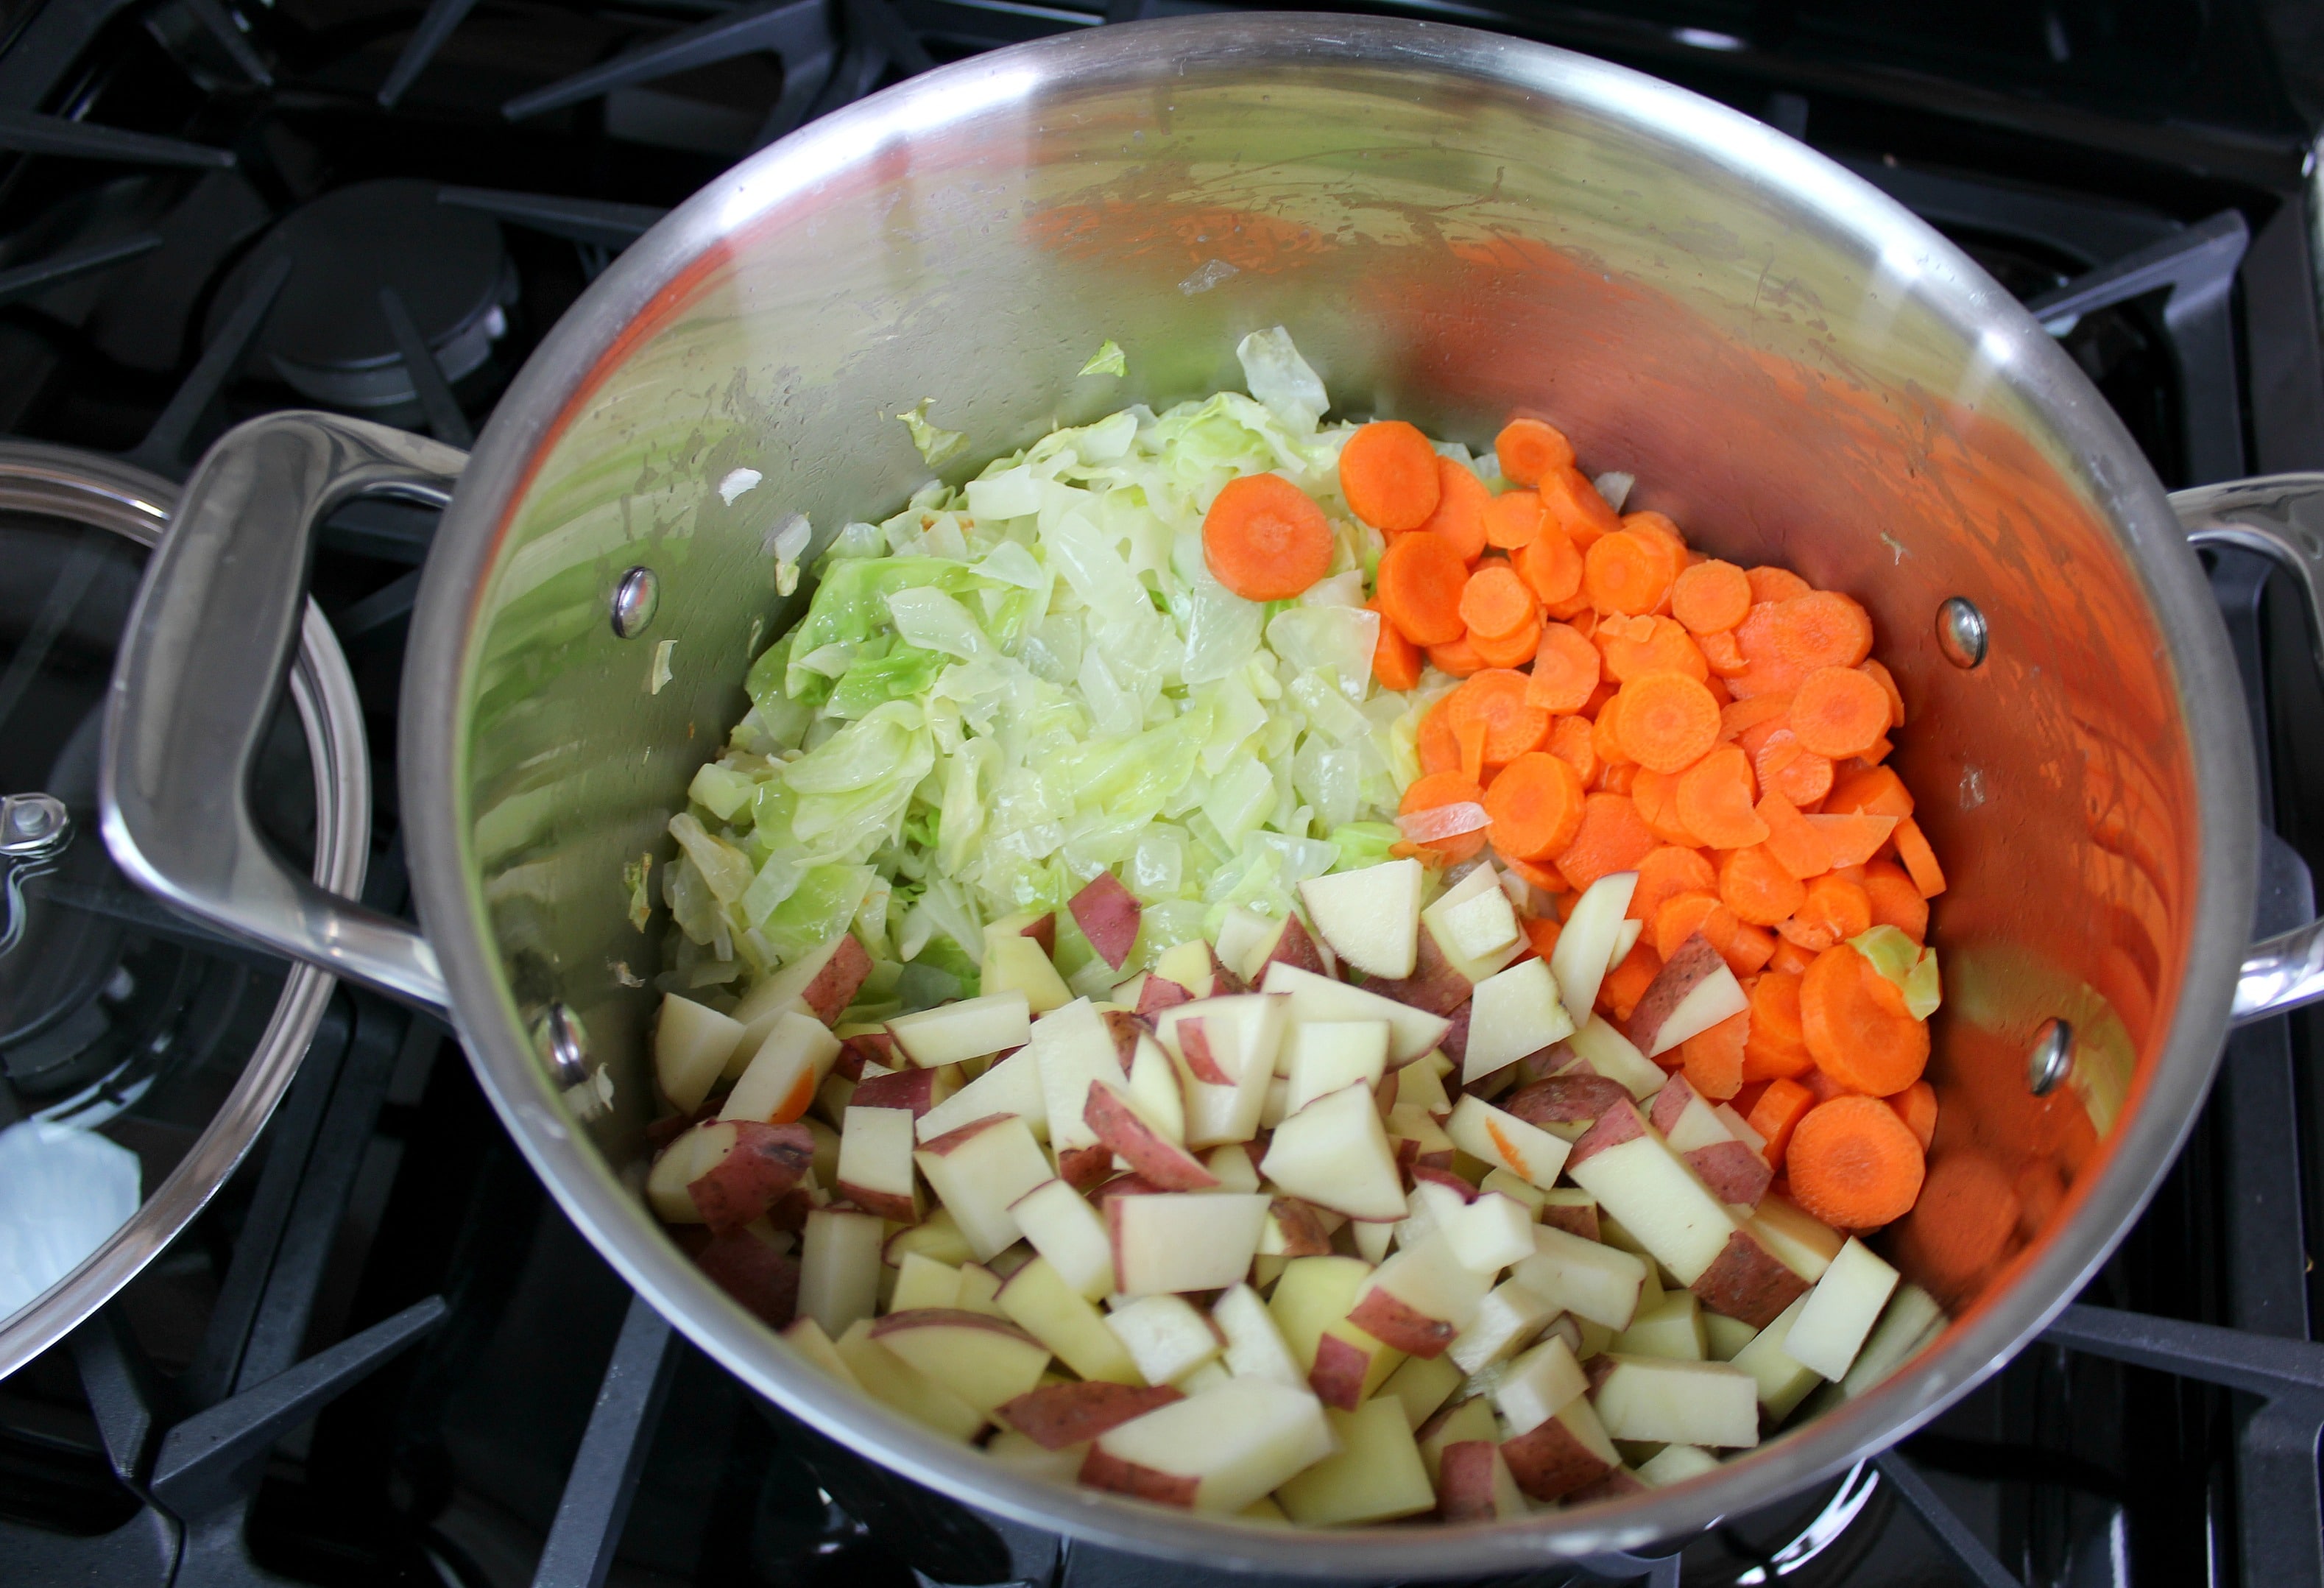 Add potatoes, carrots, and any other vegetables to the cabbage and onions.